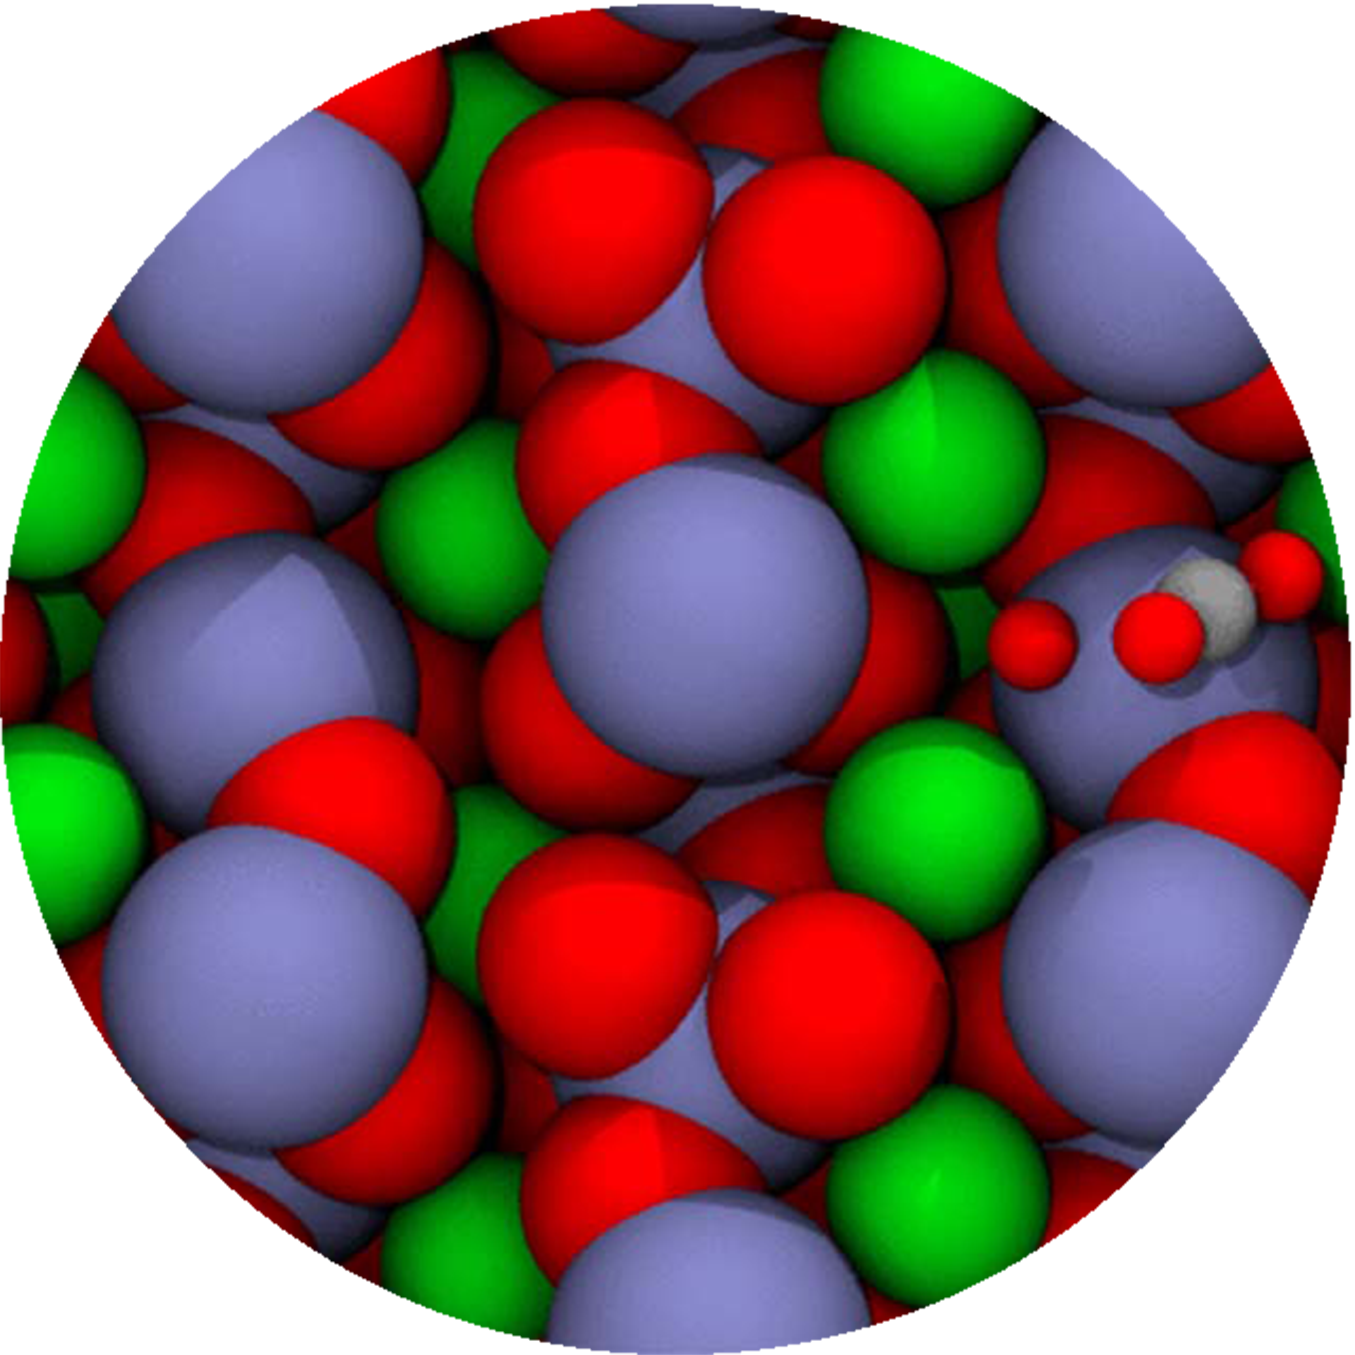 multicolored spheres of varying sizes clustered in a layer